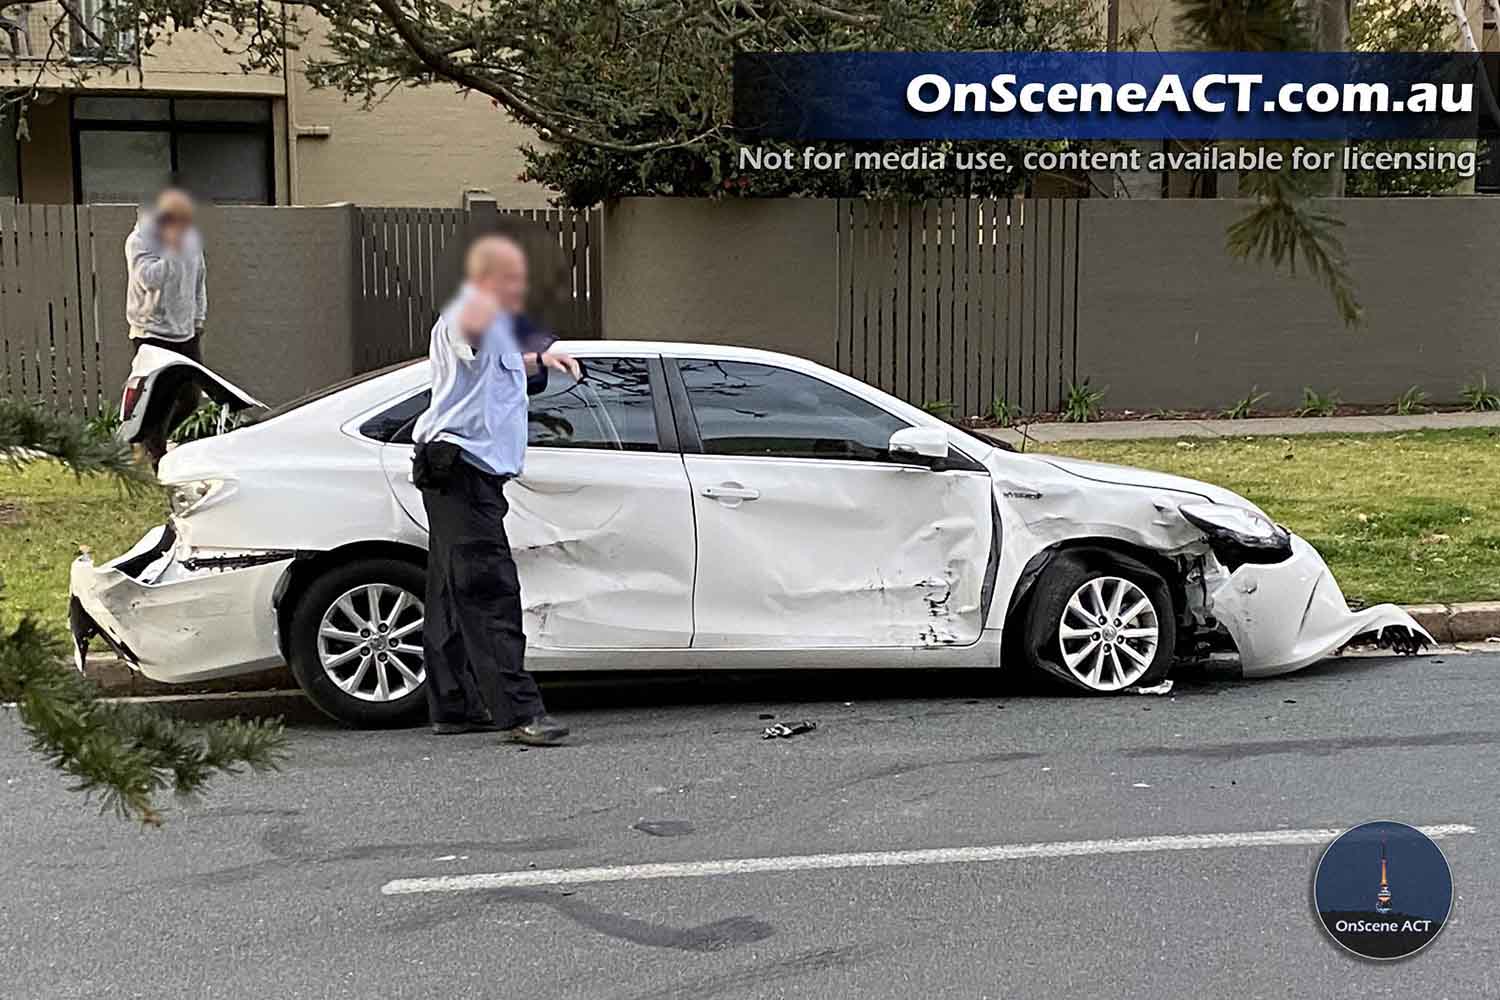 Prison escapee on the run after corrections vehicle rammed in Griffith, ACT